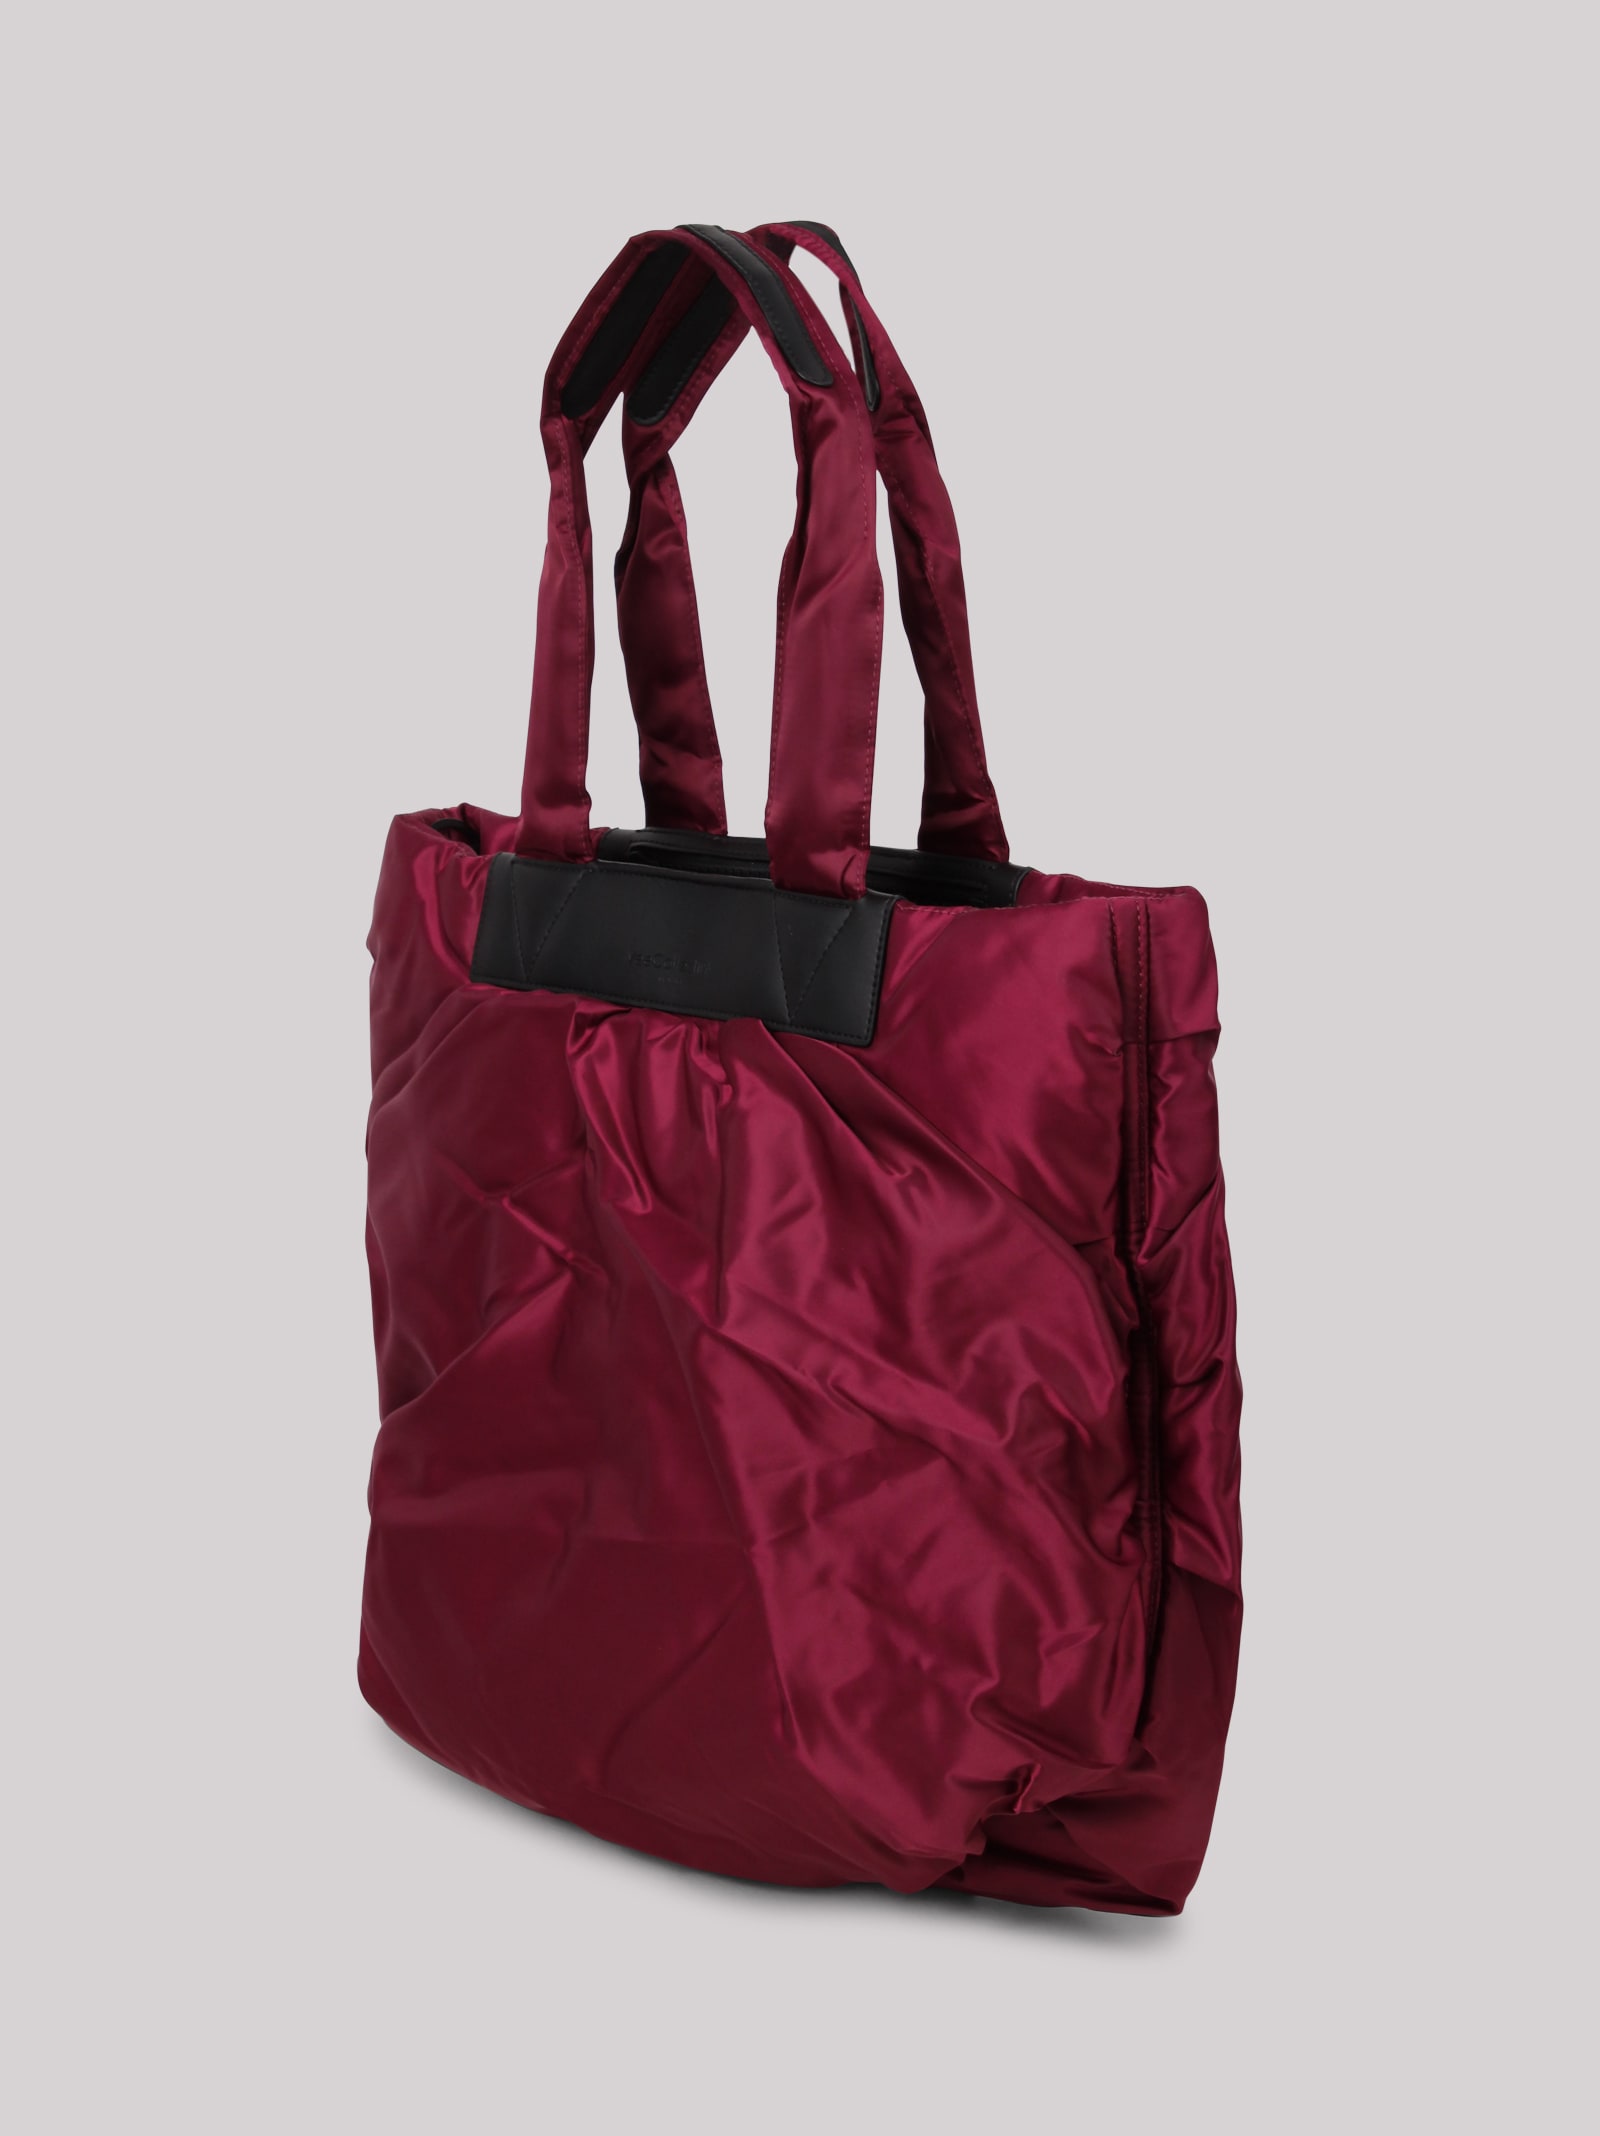 Shop Veecollective Vee Collective Large Caba Ruched Tote Bag